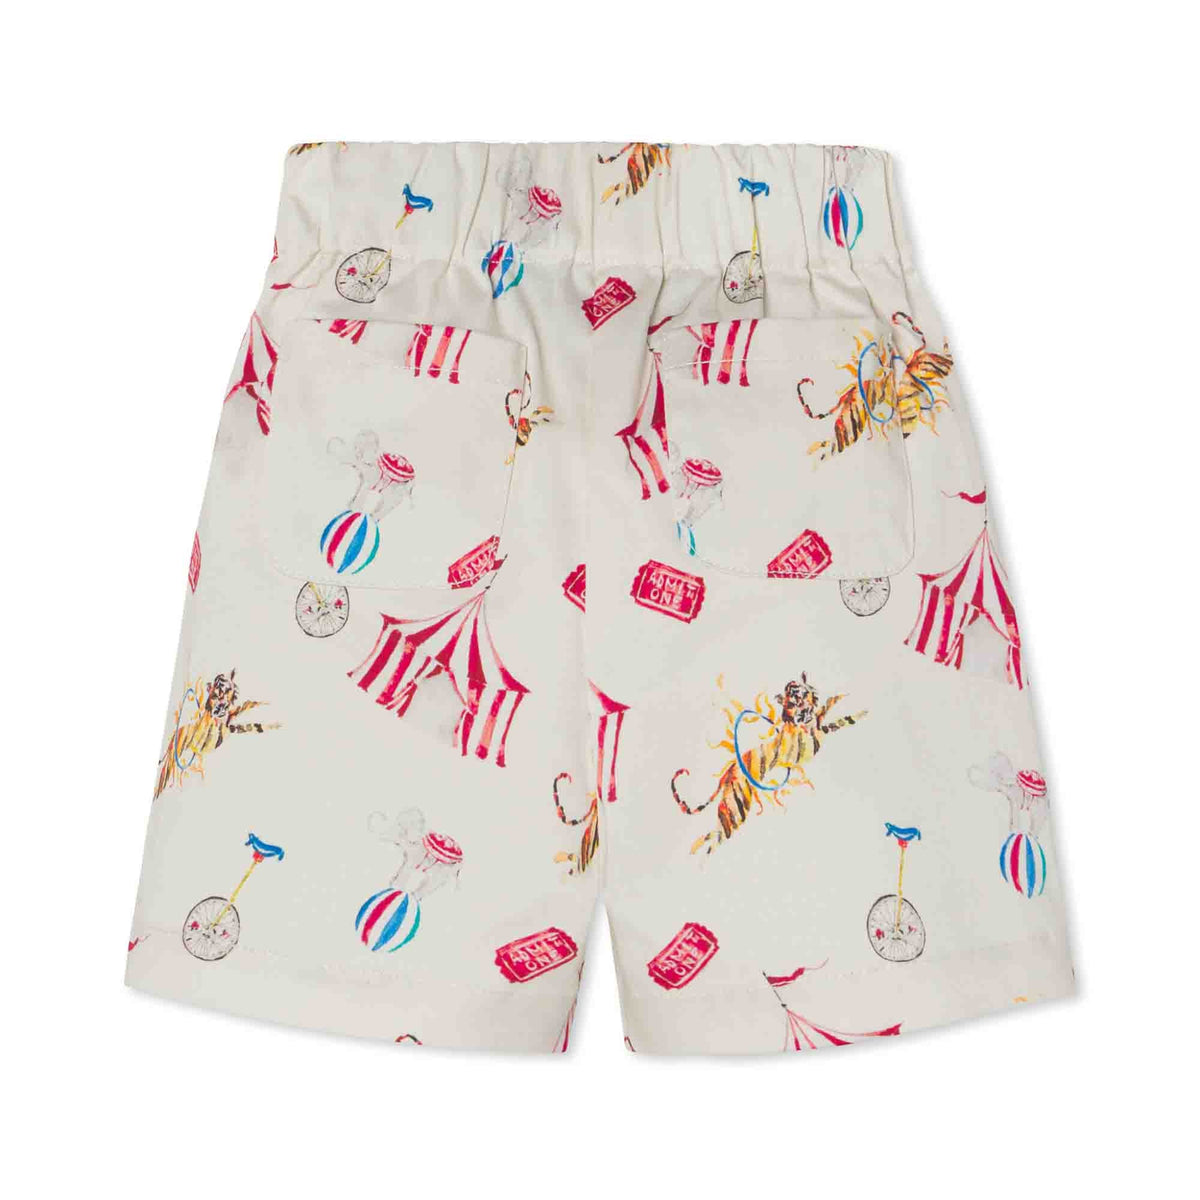 Classic and Preppy Dylan Shorts, Circus Print - FINAL SALE-Bottoms-CPC - Classic Prep Childrenswear